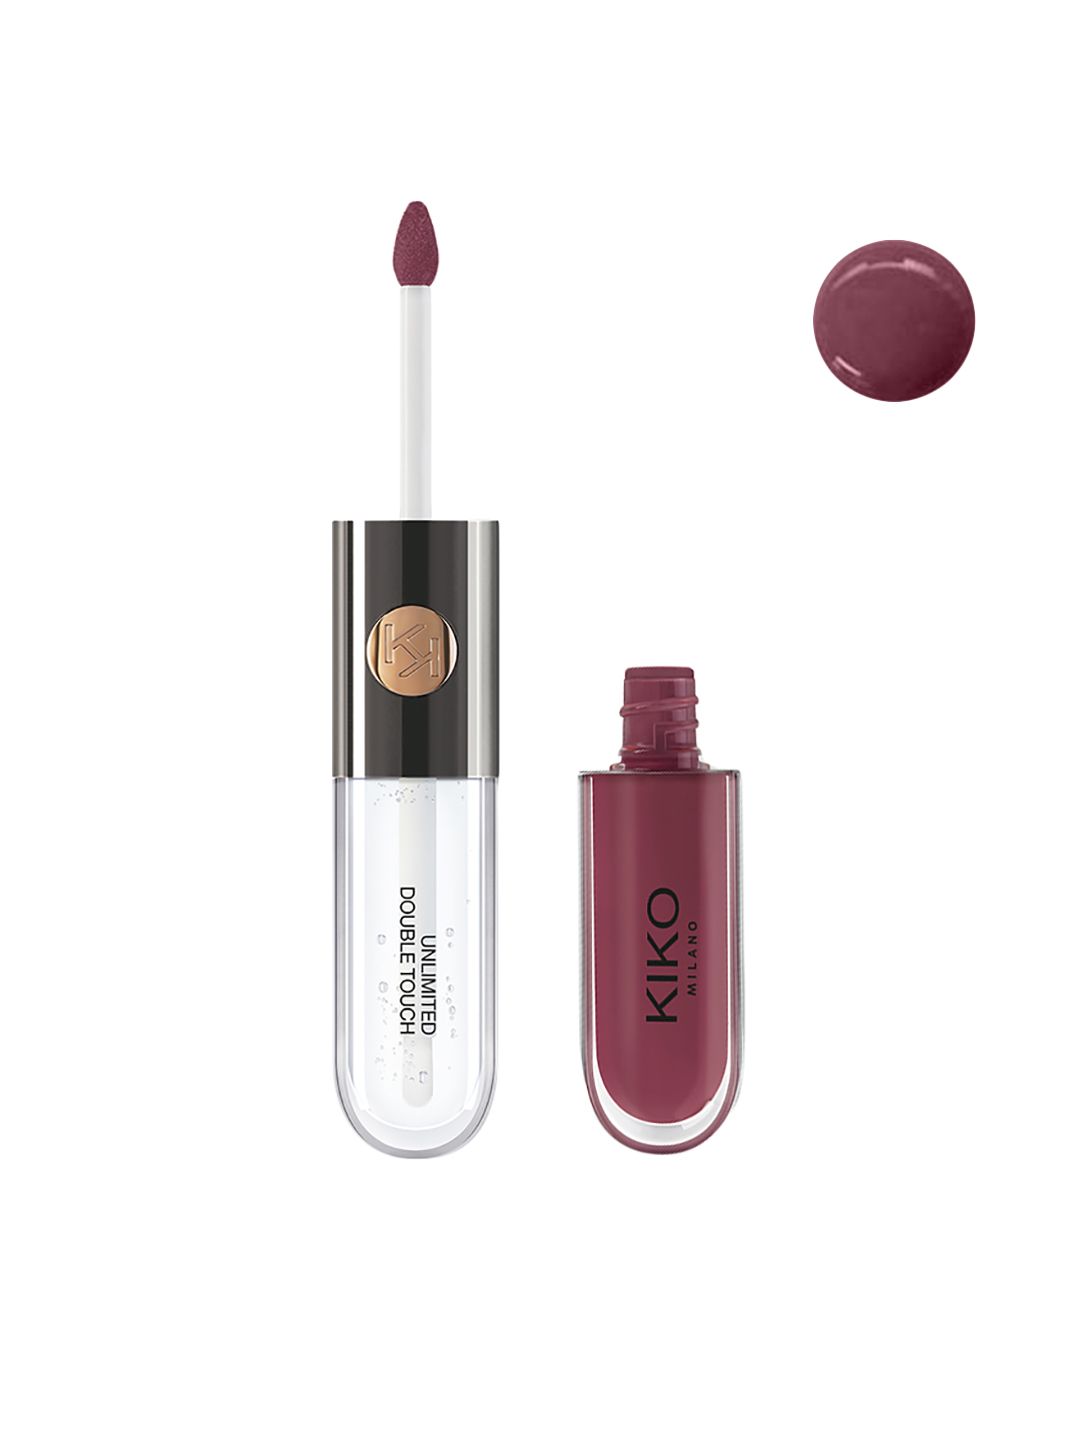 KIKO MILANO Unlimited Double Touch 121 Price in India